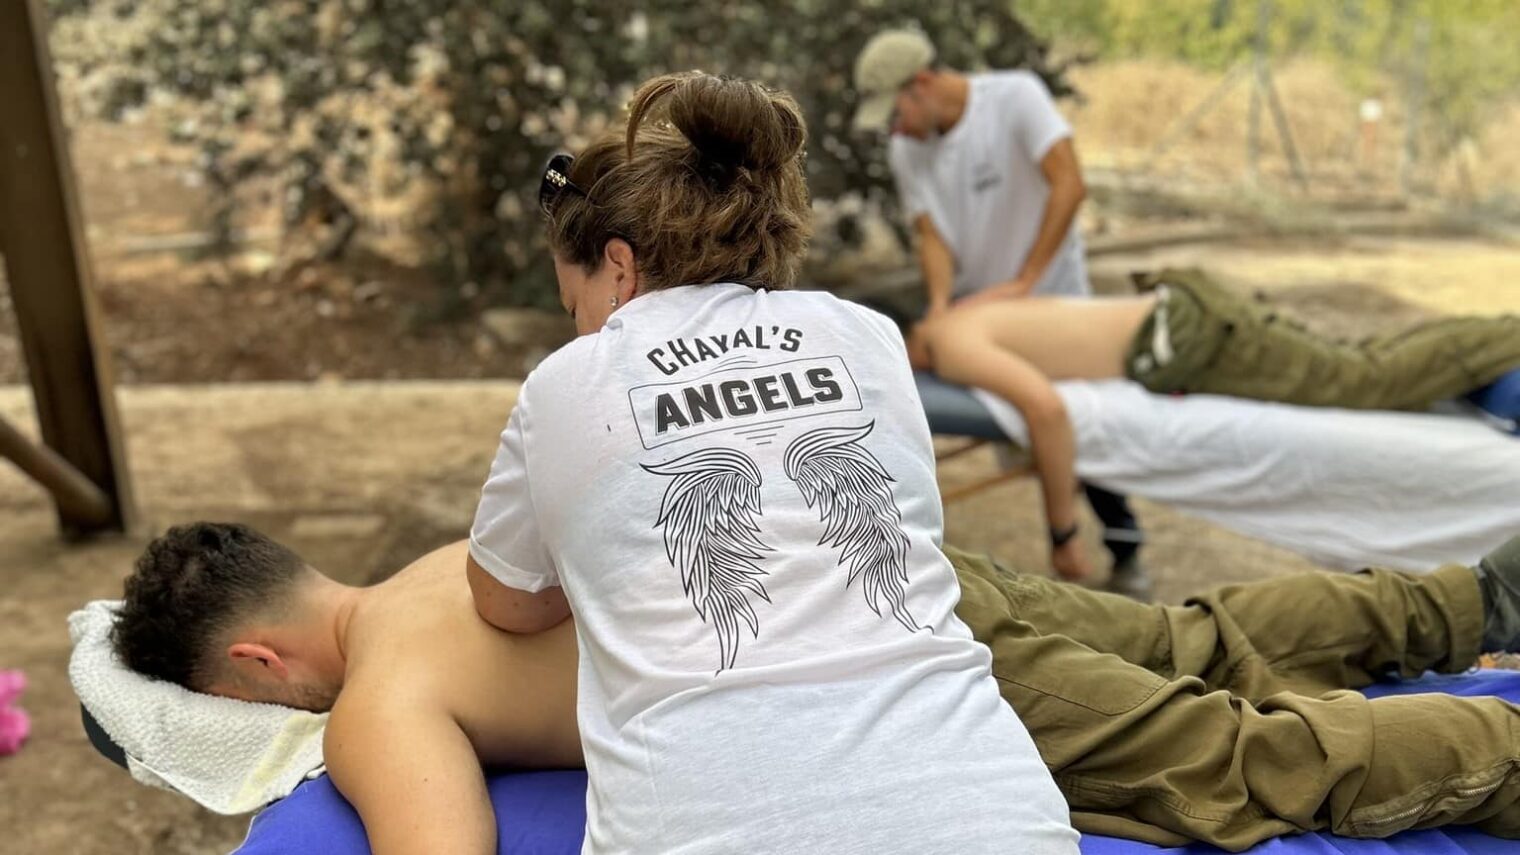 Alternative medical practitioners volunteering with soldiers through Chayalâ€™s Angels. Photo by Tasha Cohen